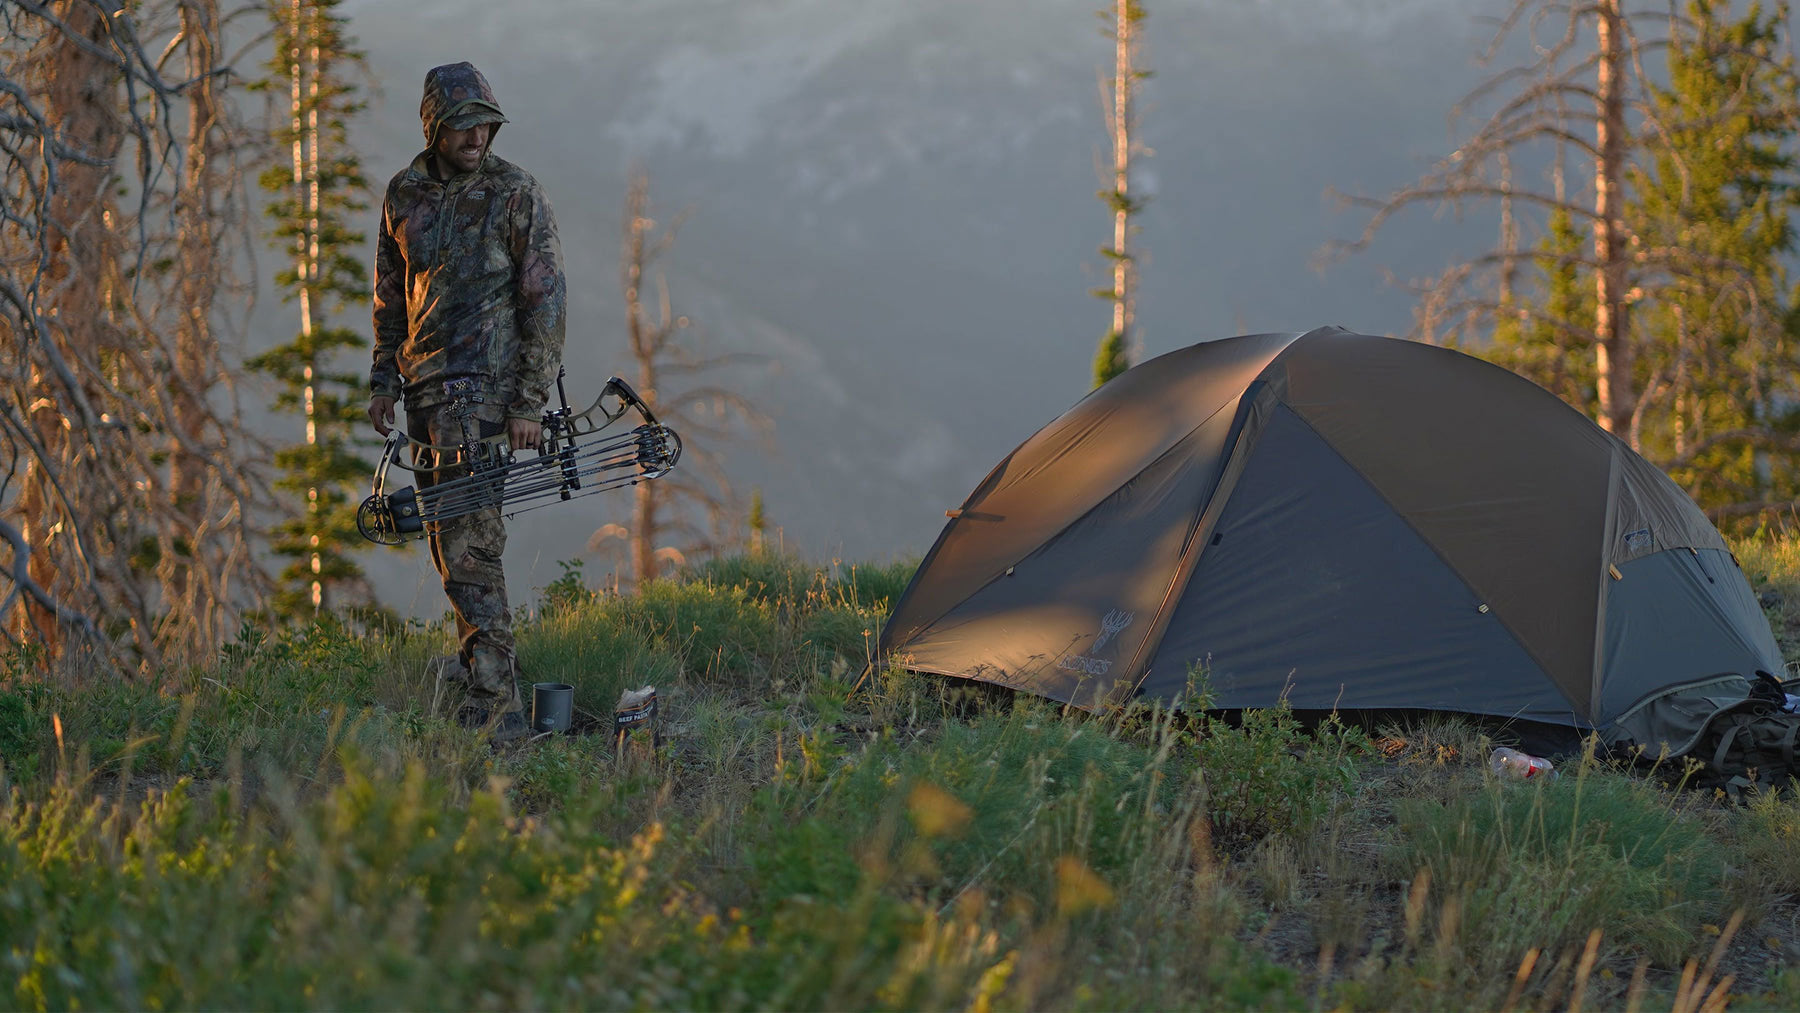 Man wearing camo holding bow next to tent